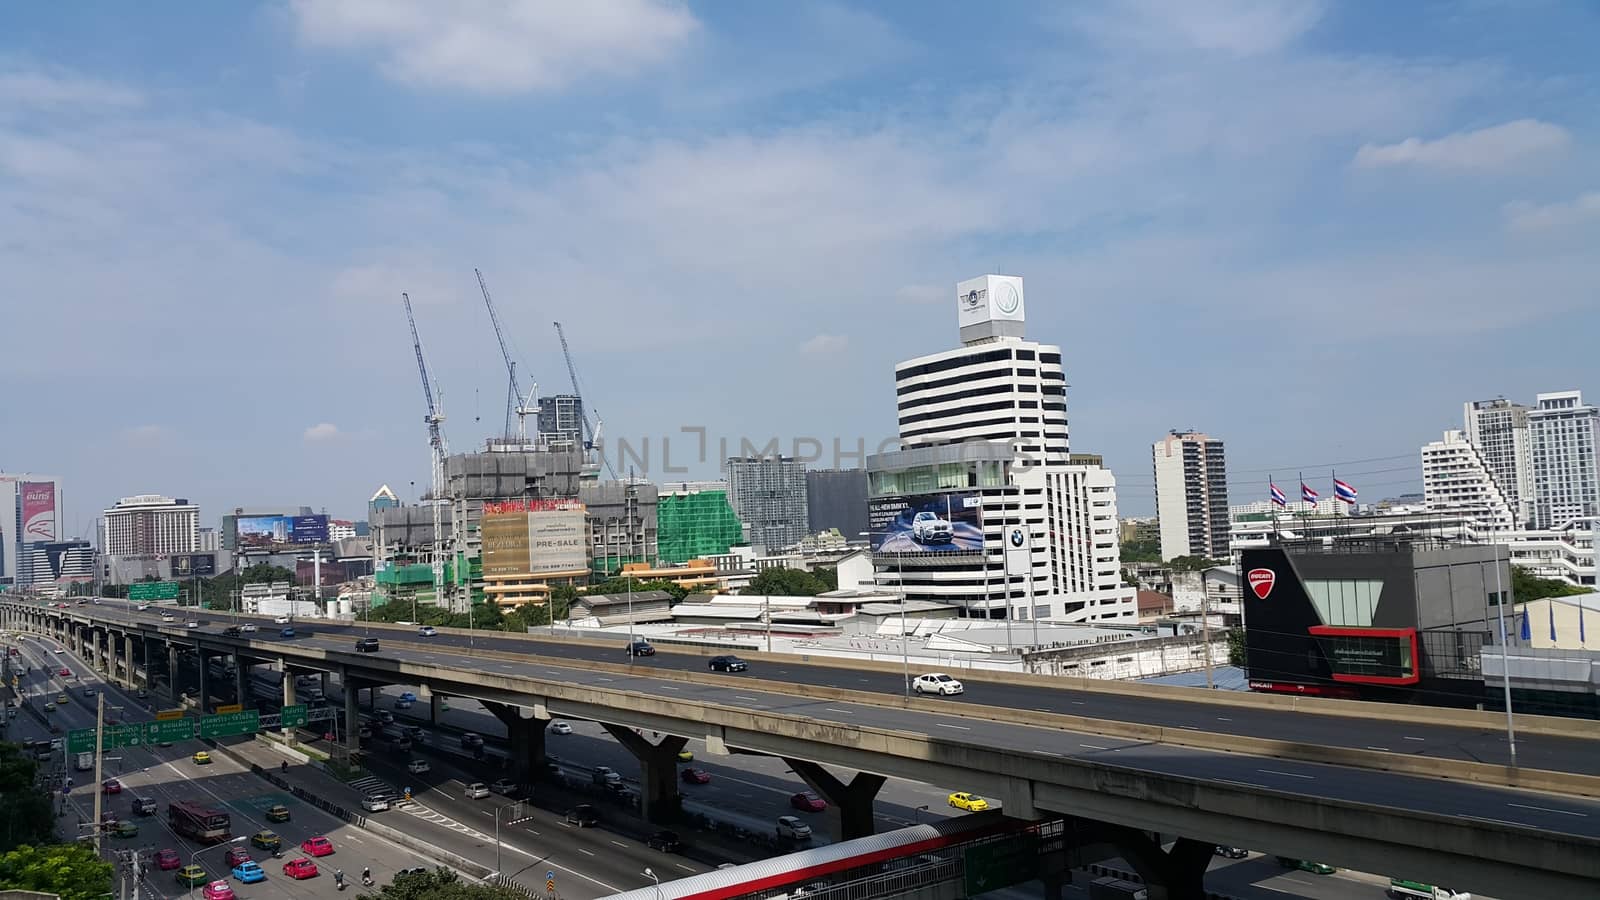 Bangkok, Thailand - November 04, 2016: People are moving on their vehicle on both express way and normal way. The photo also shown the under-construction building with working crane, the car showroom and the motorcycle showroom